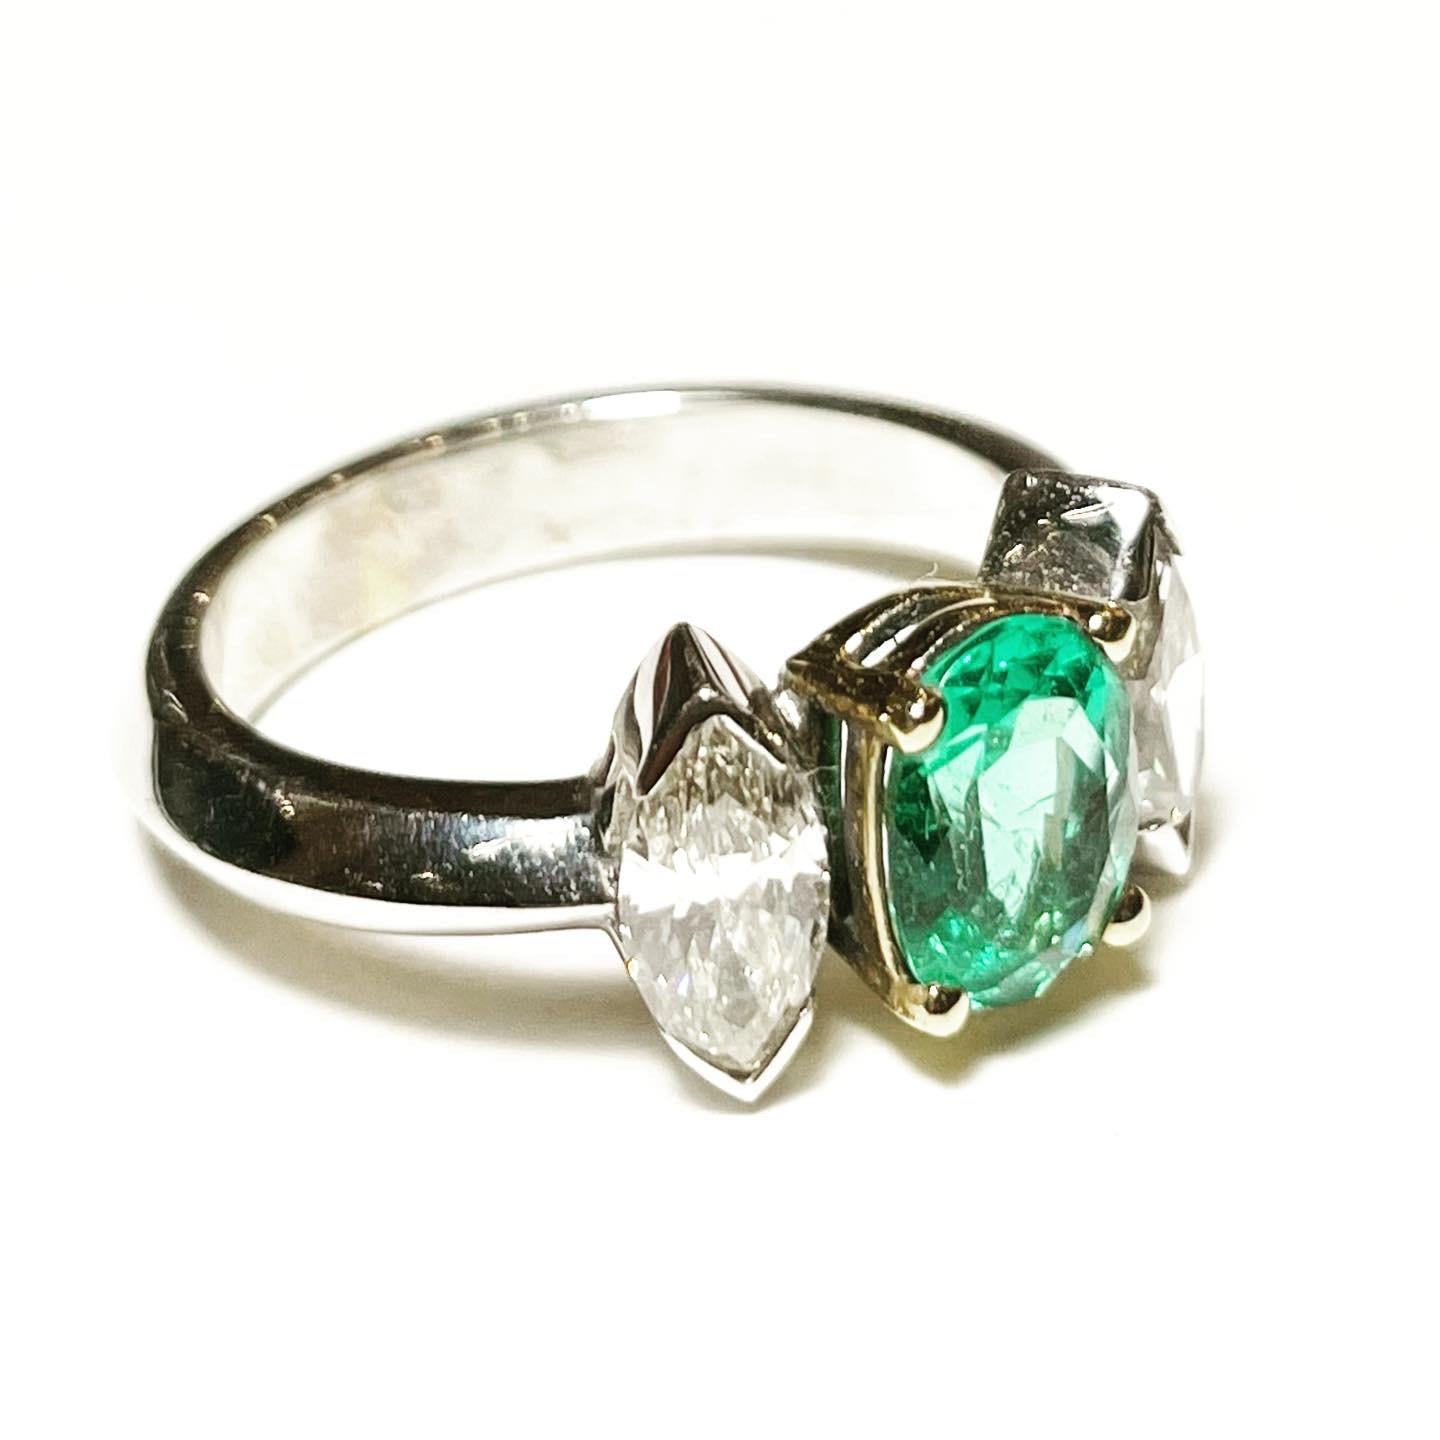 This classic three-stone engagement ring is crafted in 18K white gold.
At the centre of this three stone ring there is a gorgeous oval cut emerald  and sat either side is a bright sparkling navette diamond. The oval cut emerald weights 1.72 carat